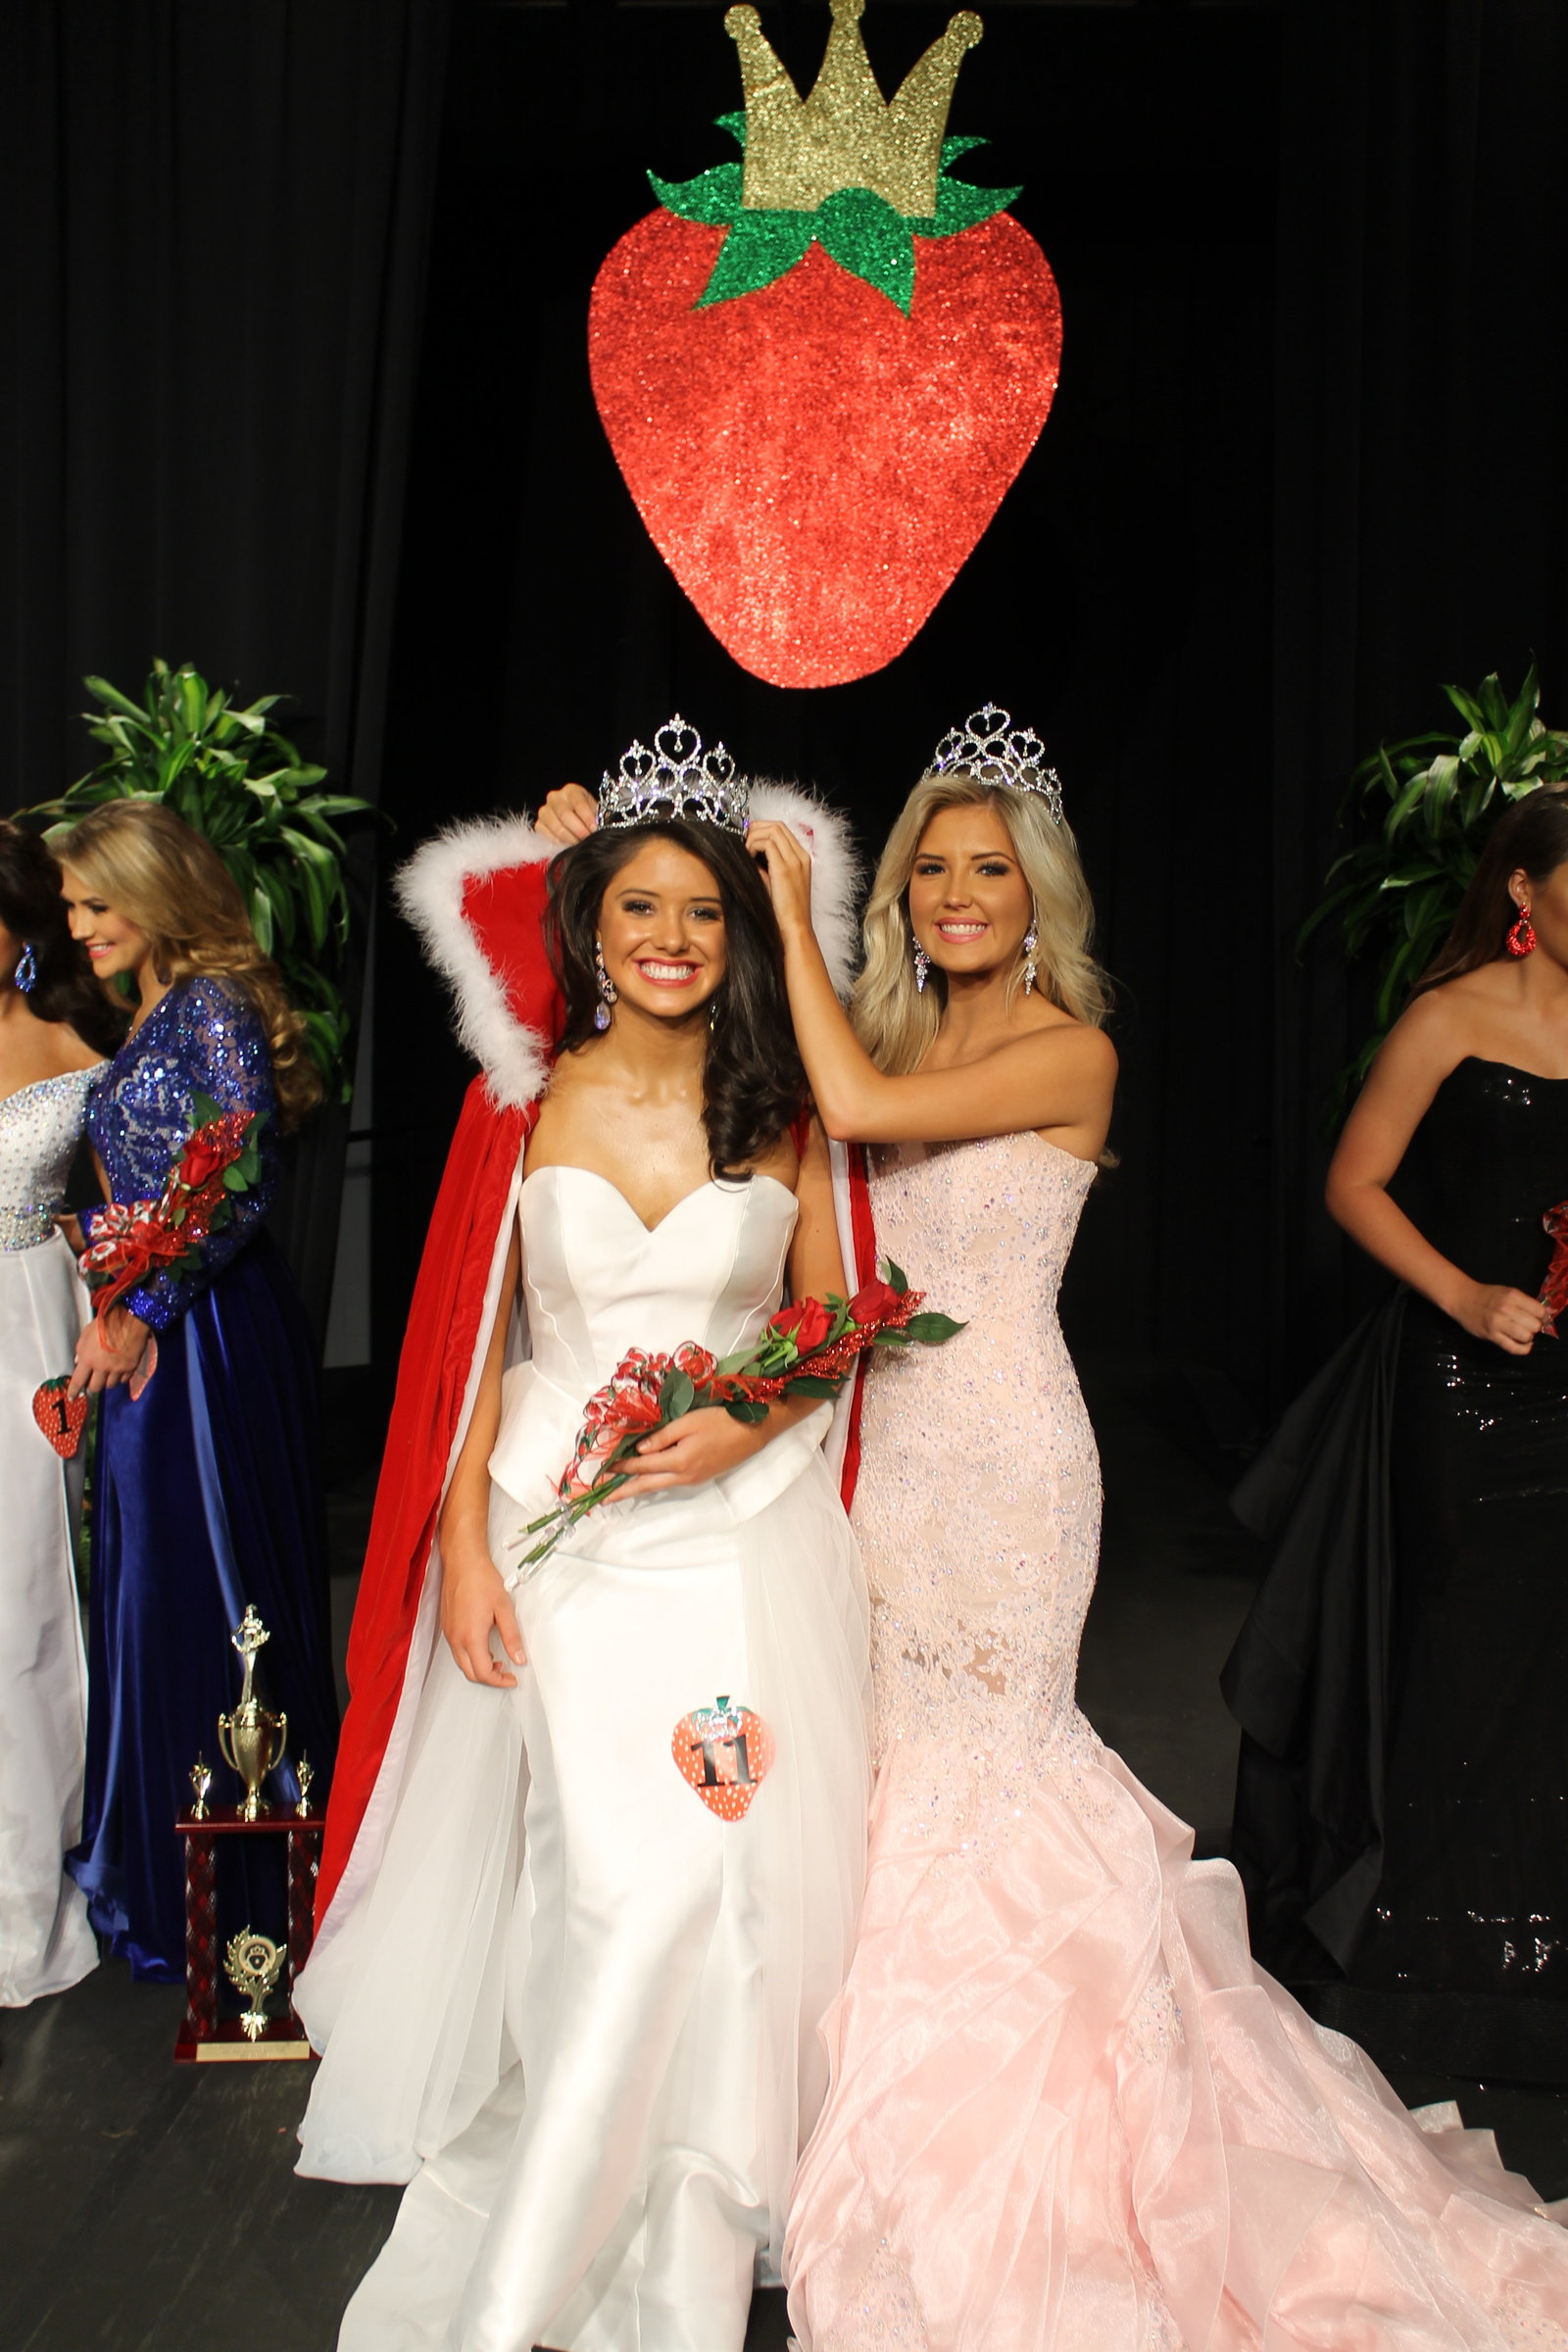 West Tennessee Strawberry Festival - Humboldt TN - Pageant - Teen Terr6